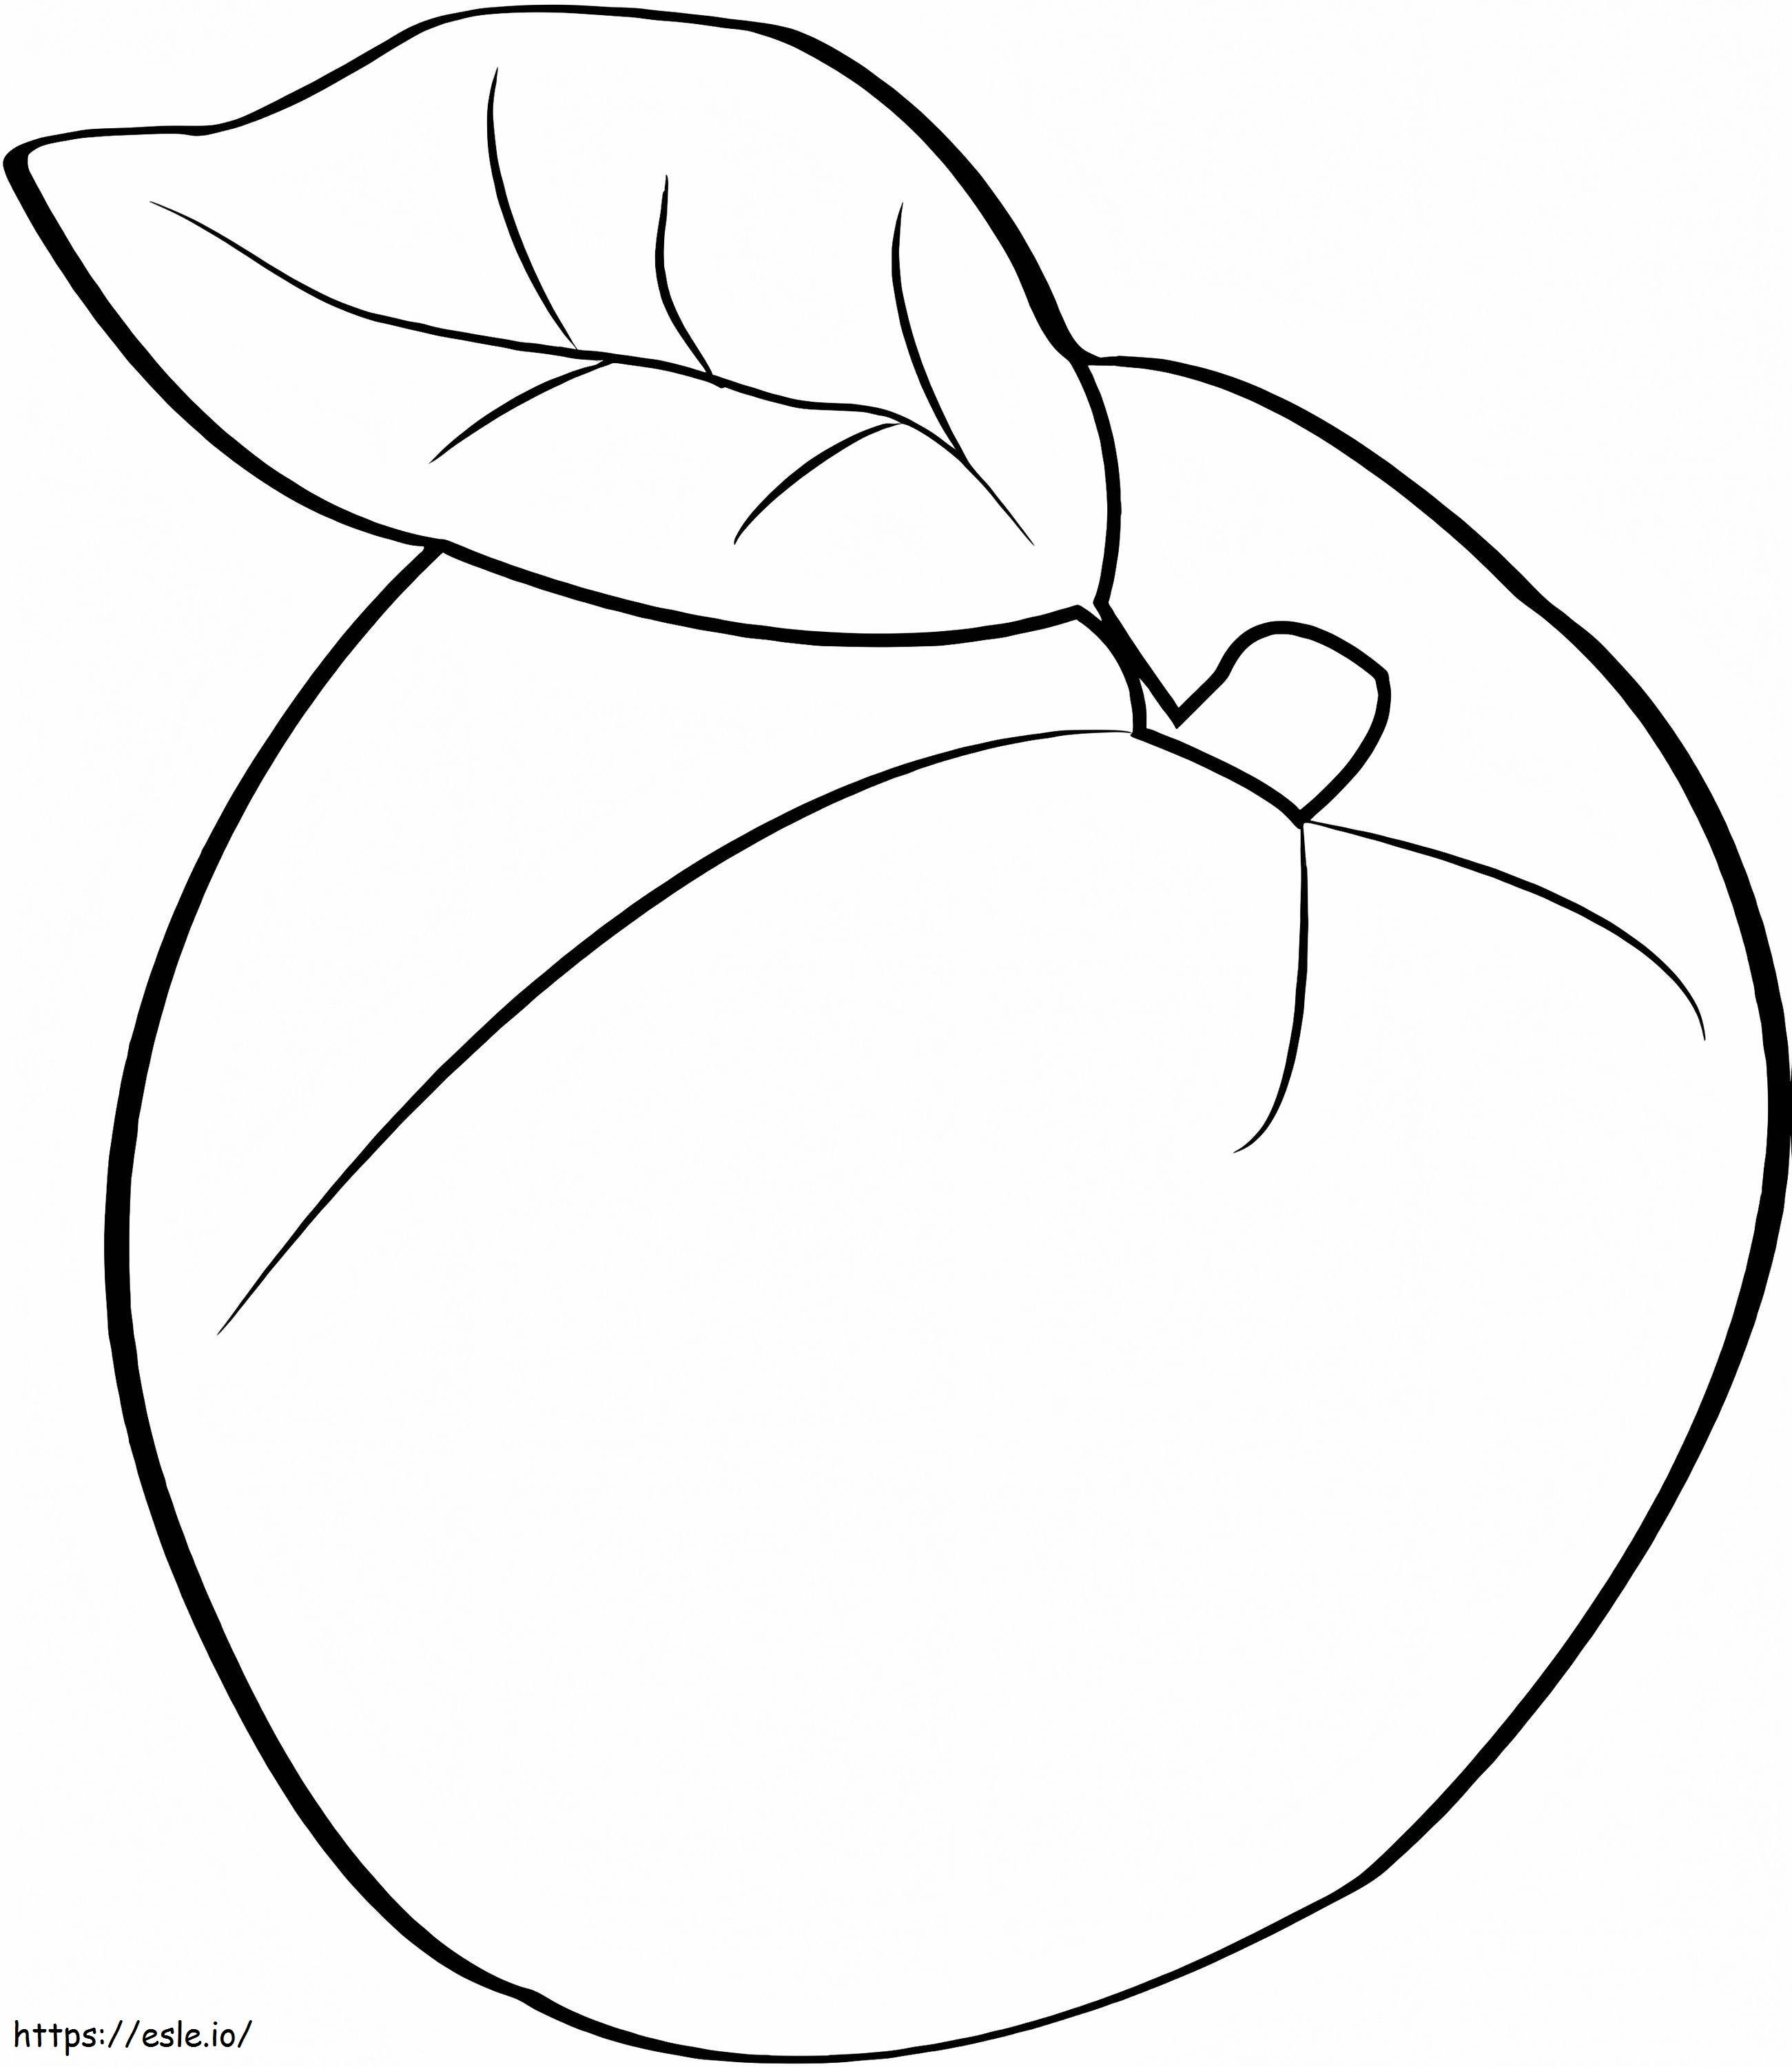 Normal Apricot coloring page